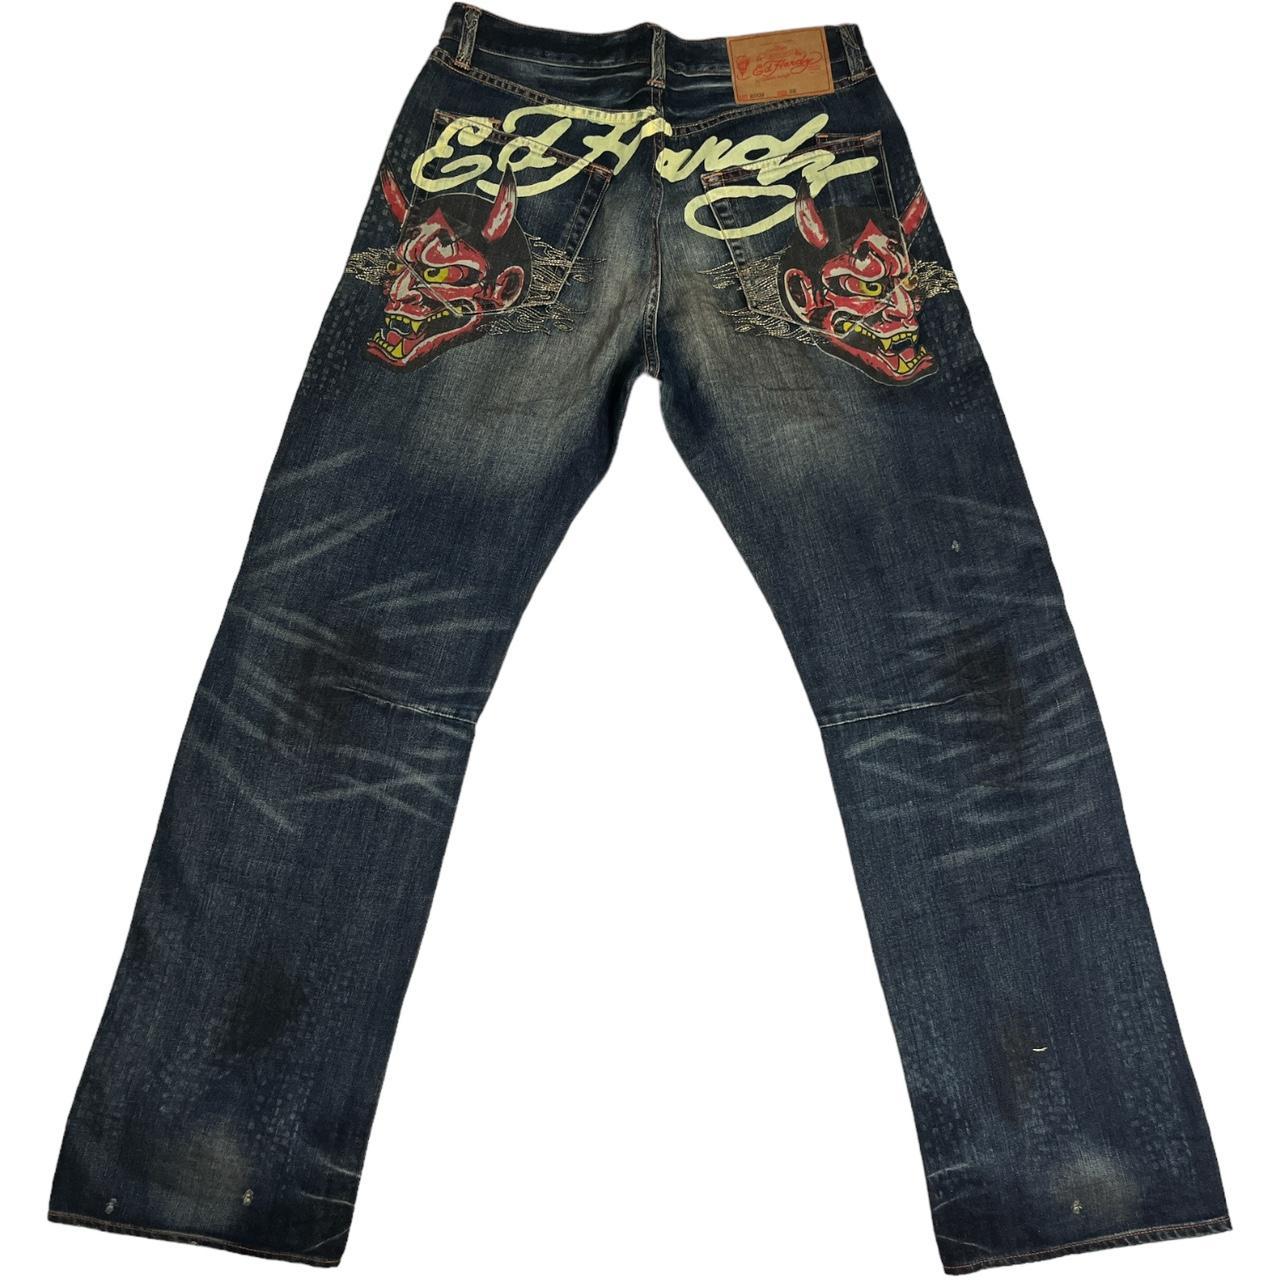 Authentic Ed Hardy Jeans Very Baggy fit , Good... - Depop